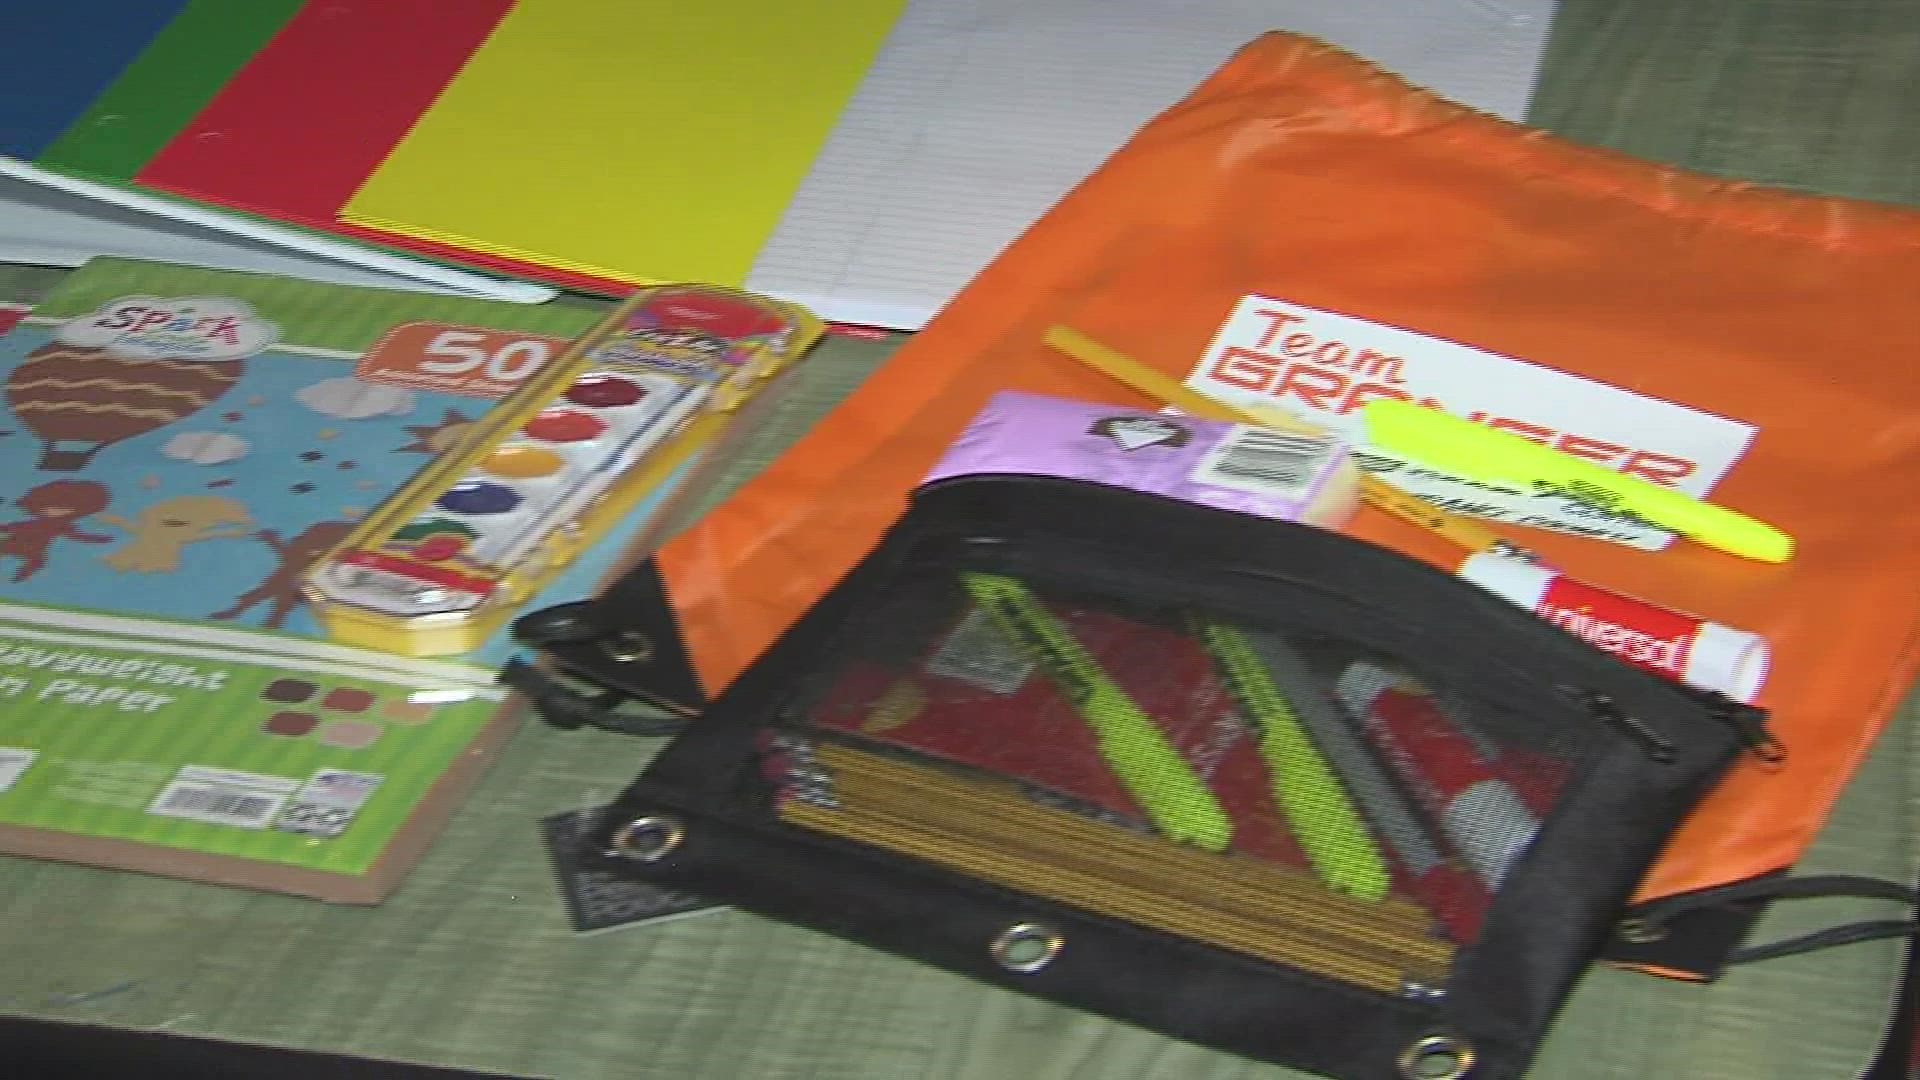 This year marks the ninth year for "Back to School Orange County."